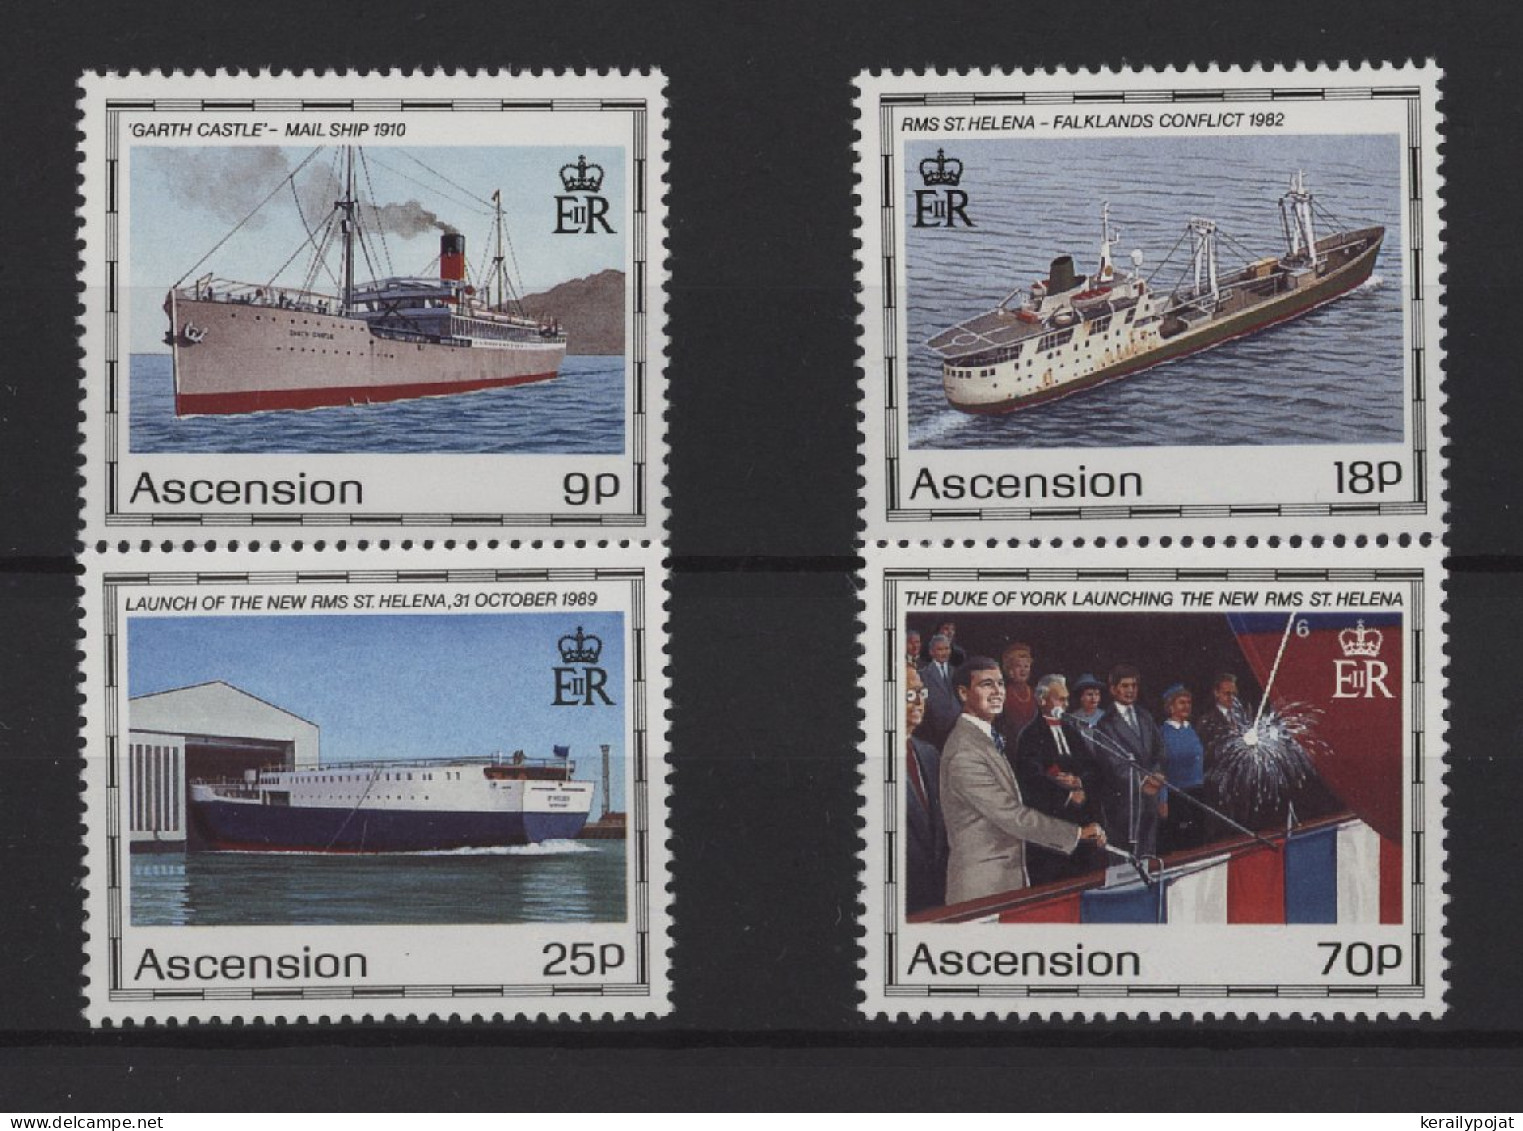 Ascension - 1990 RMS St. Helena 2 MNH__(TH-25220) - Ascension